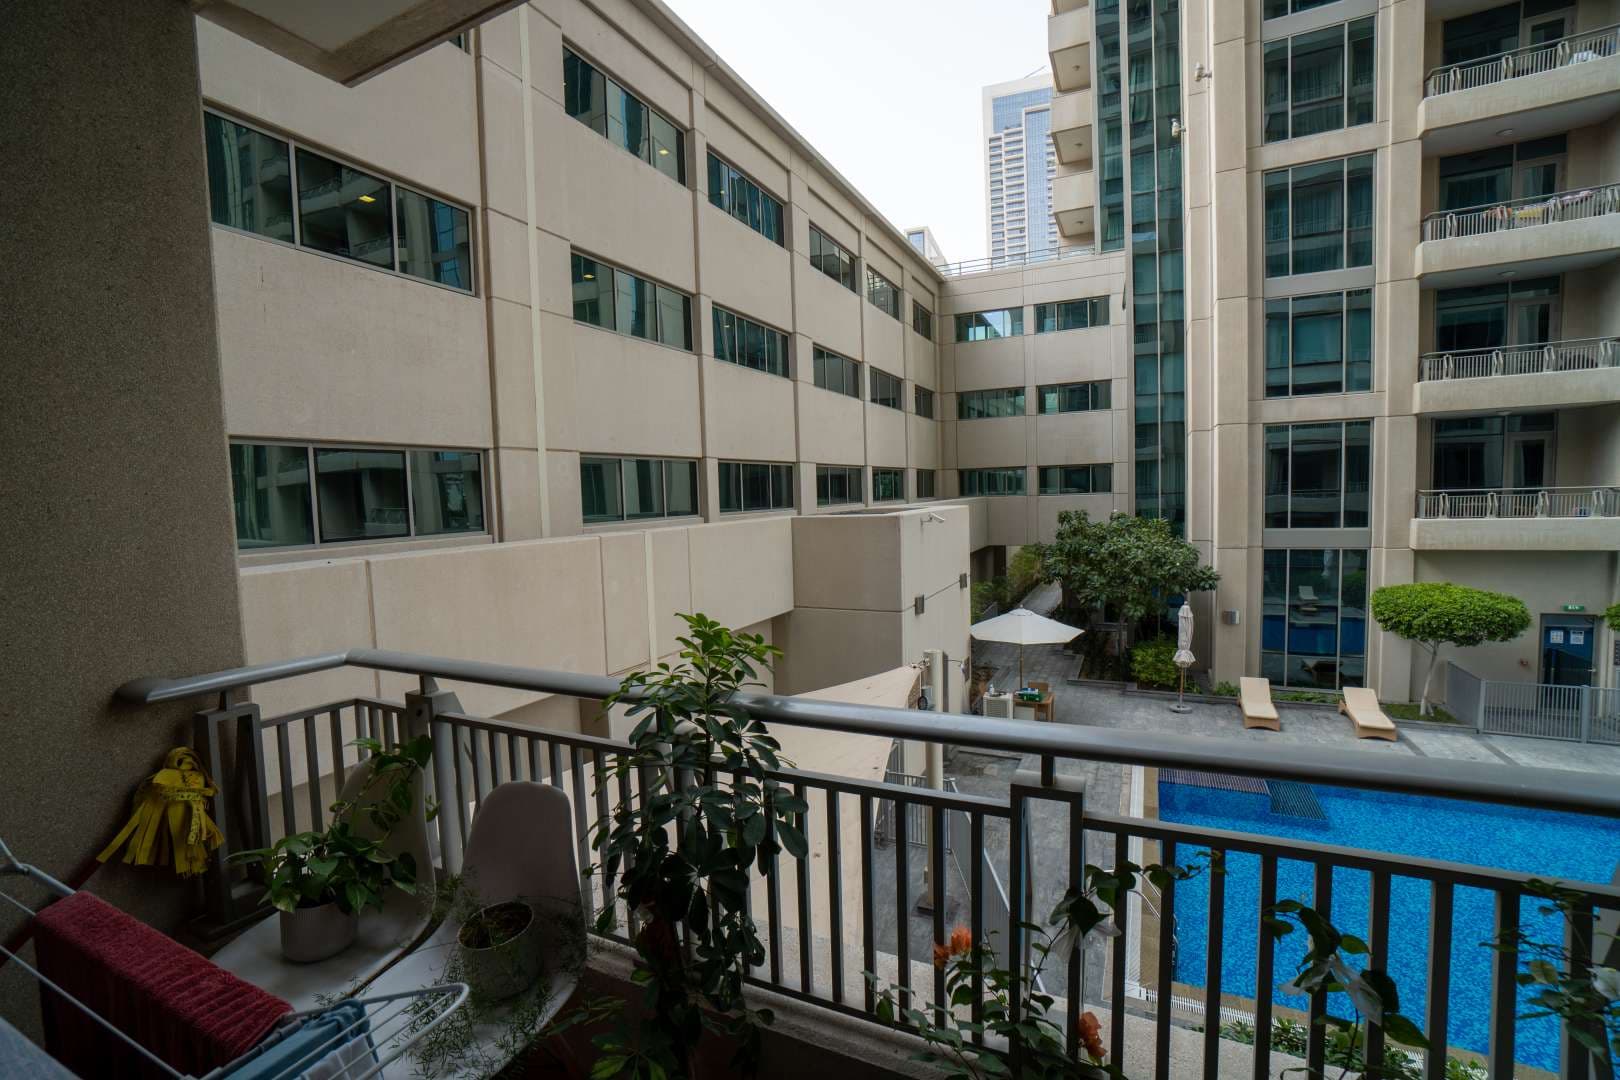 1 Bedroom Apartment For Rent Boulevard Central Towers Lp10892 2e1871a656c46200.jpg